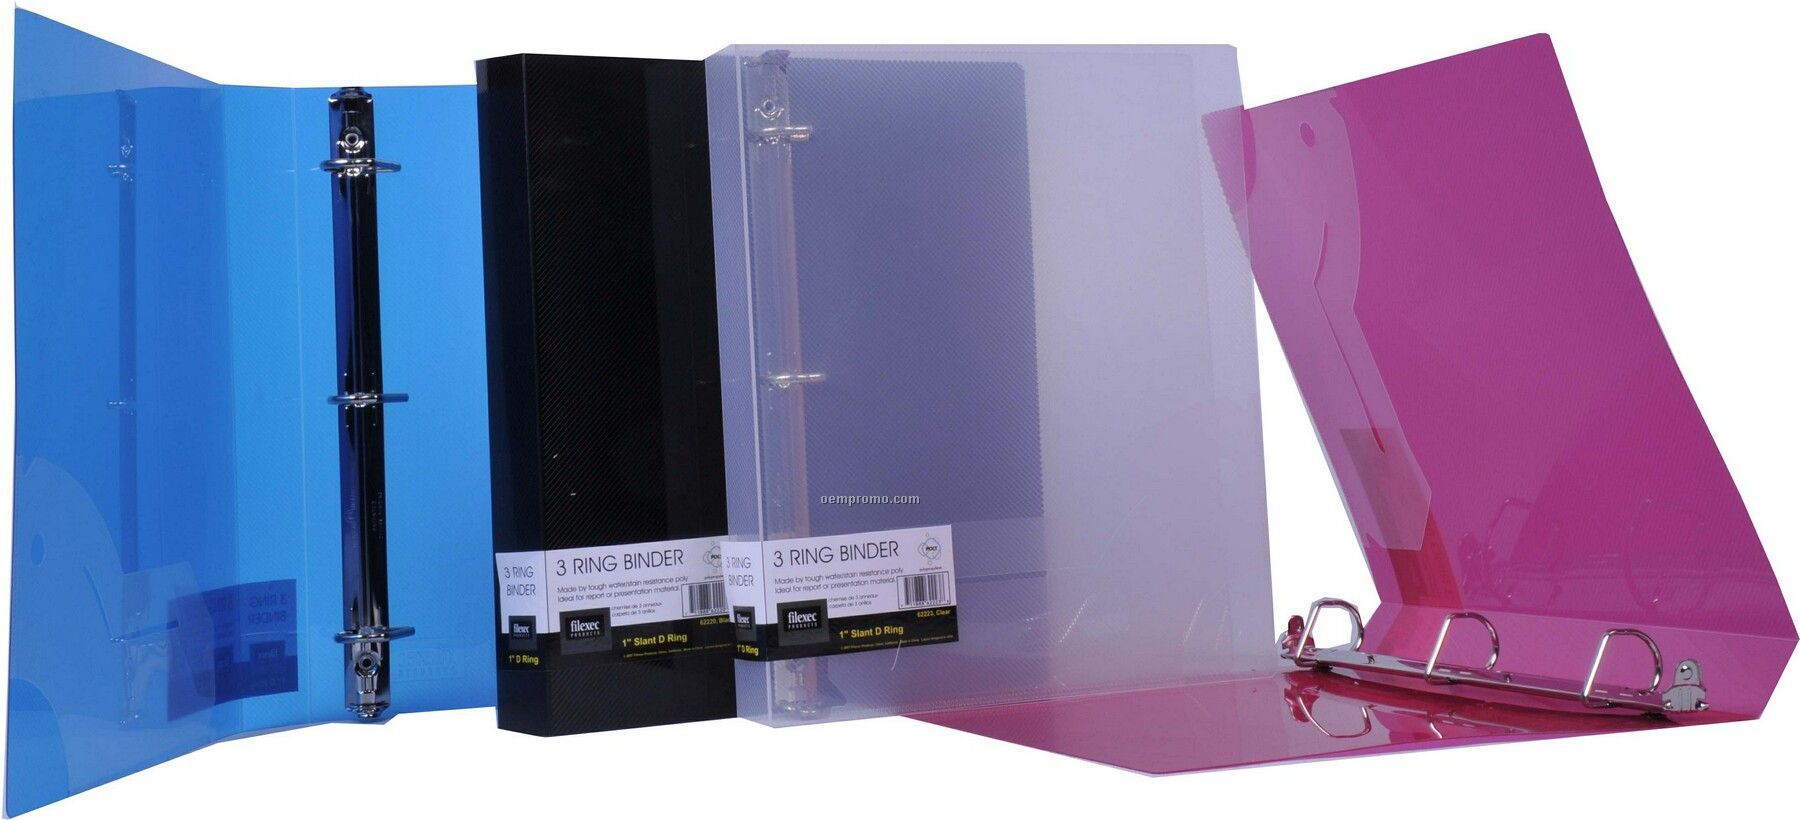 Translucent Red D-ring Binder With 1" Ring